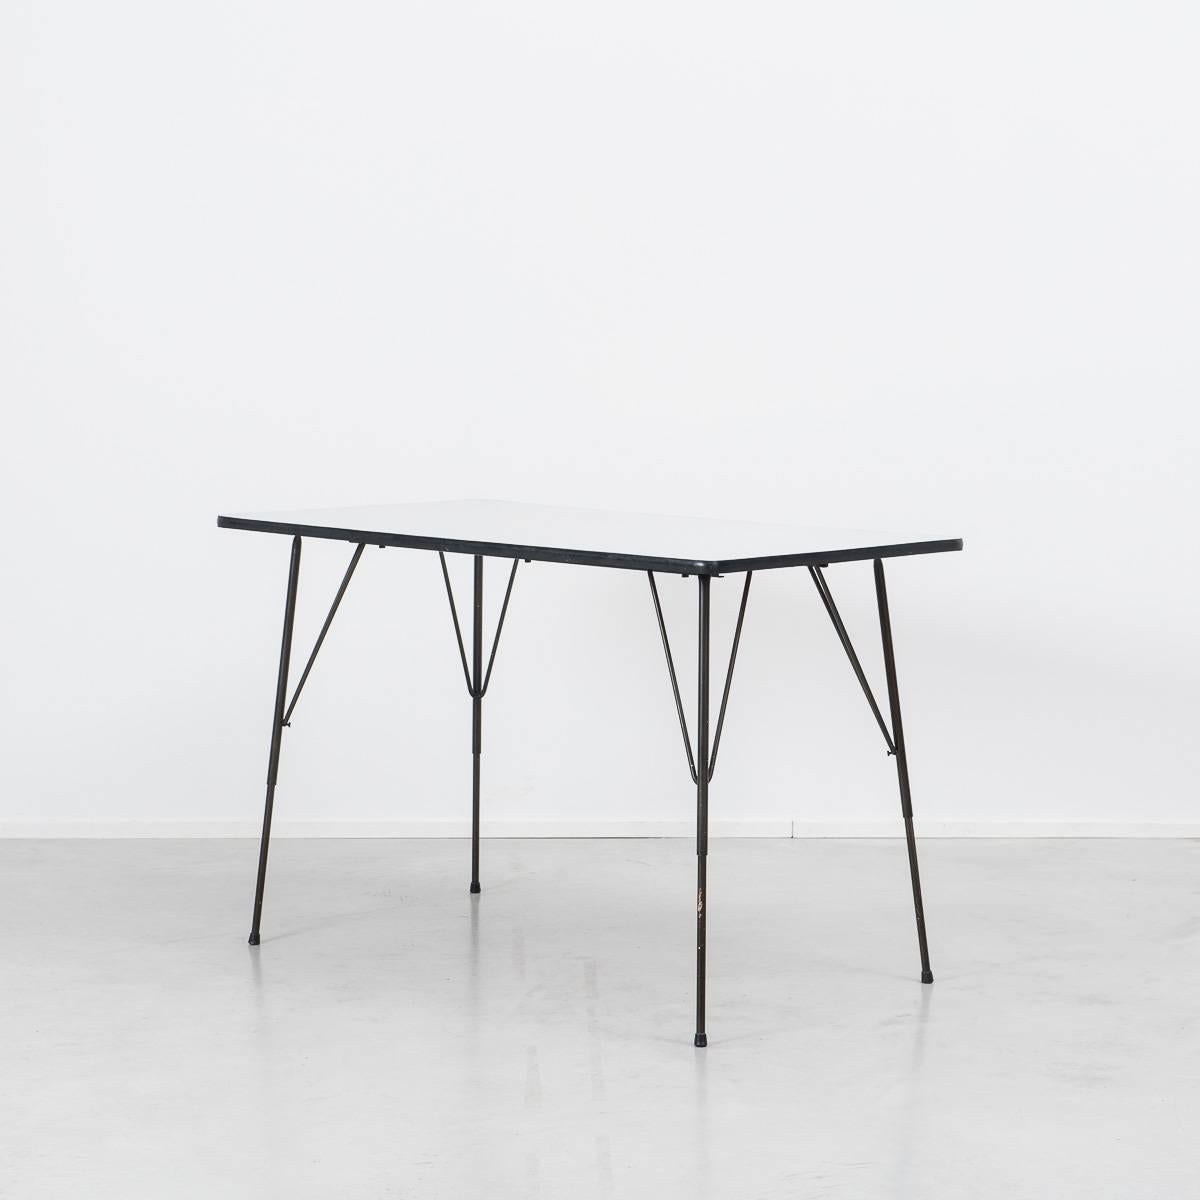 Rudolf Wolf dining table, designed in the 1950s for Elsrijk, Holland. A beautiful minimalistic design, it has a black metal frame and light grey formica top, edged in black. The height of the table is adjustable (46-77cm), so when low it is useable